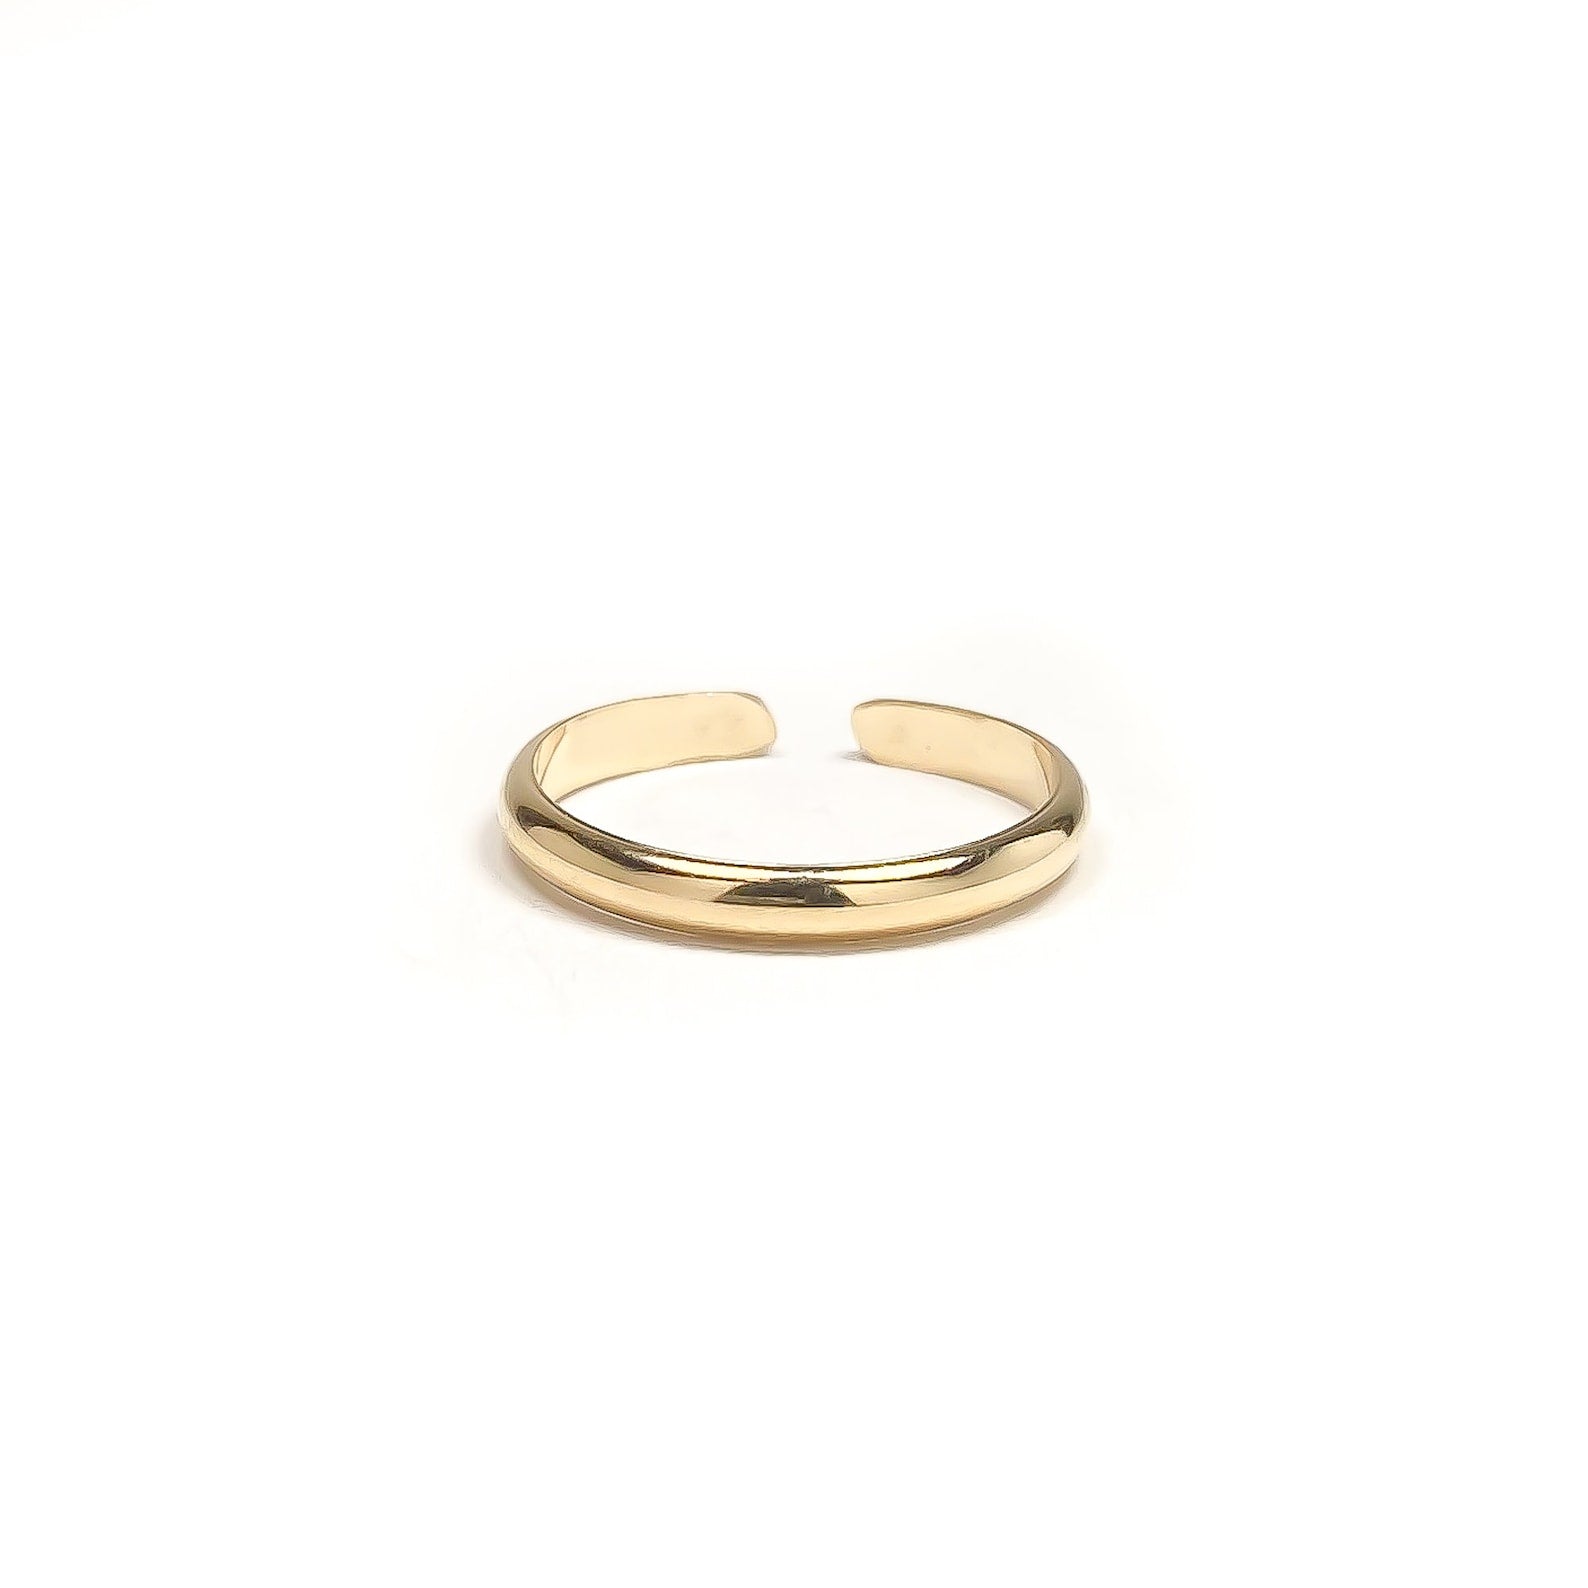 Gold Toe Ring Adjustable Open No Pinch 14k Gold Filled Plain thin Band